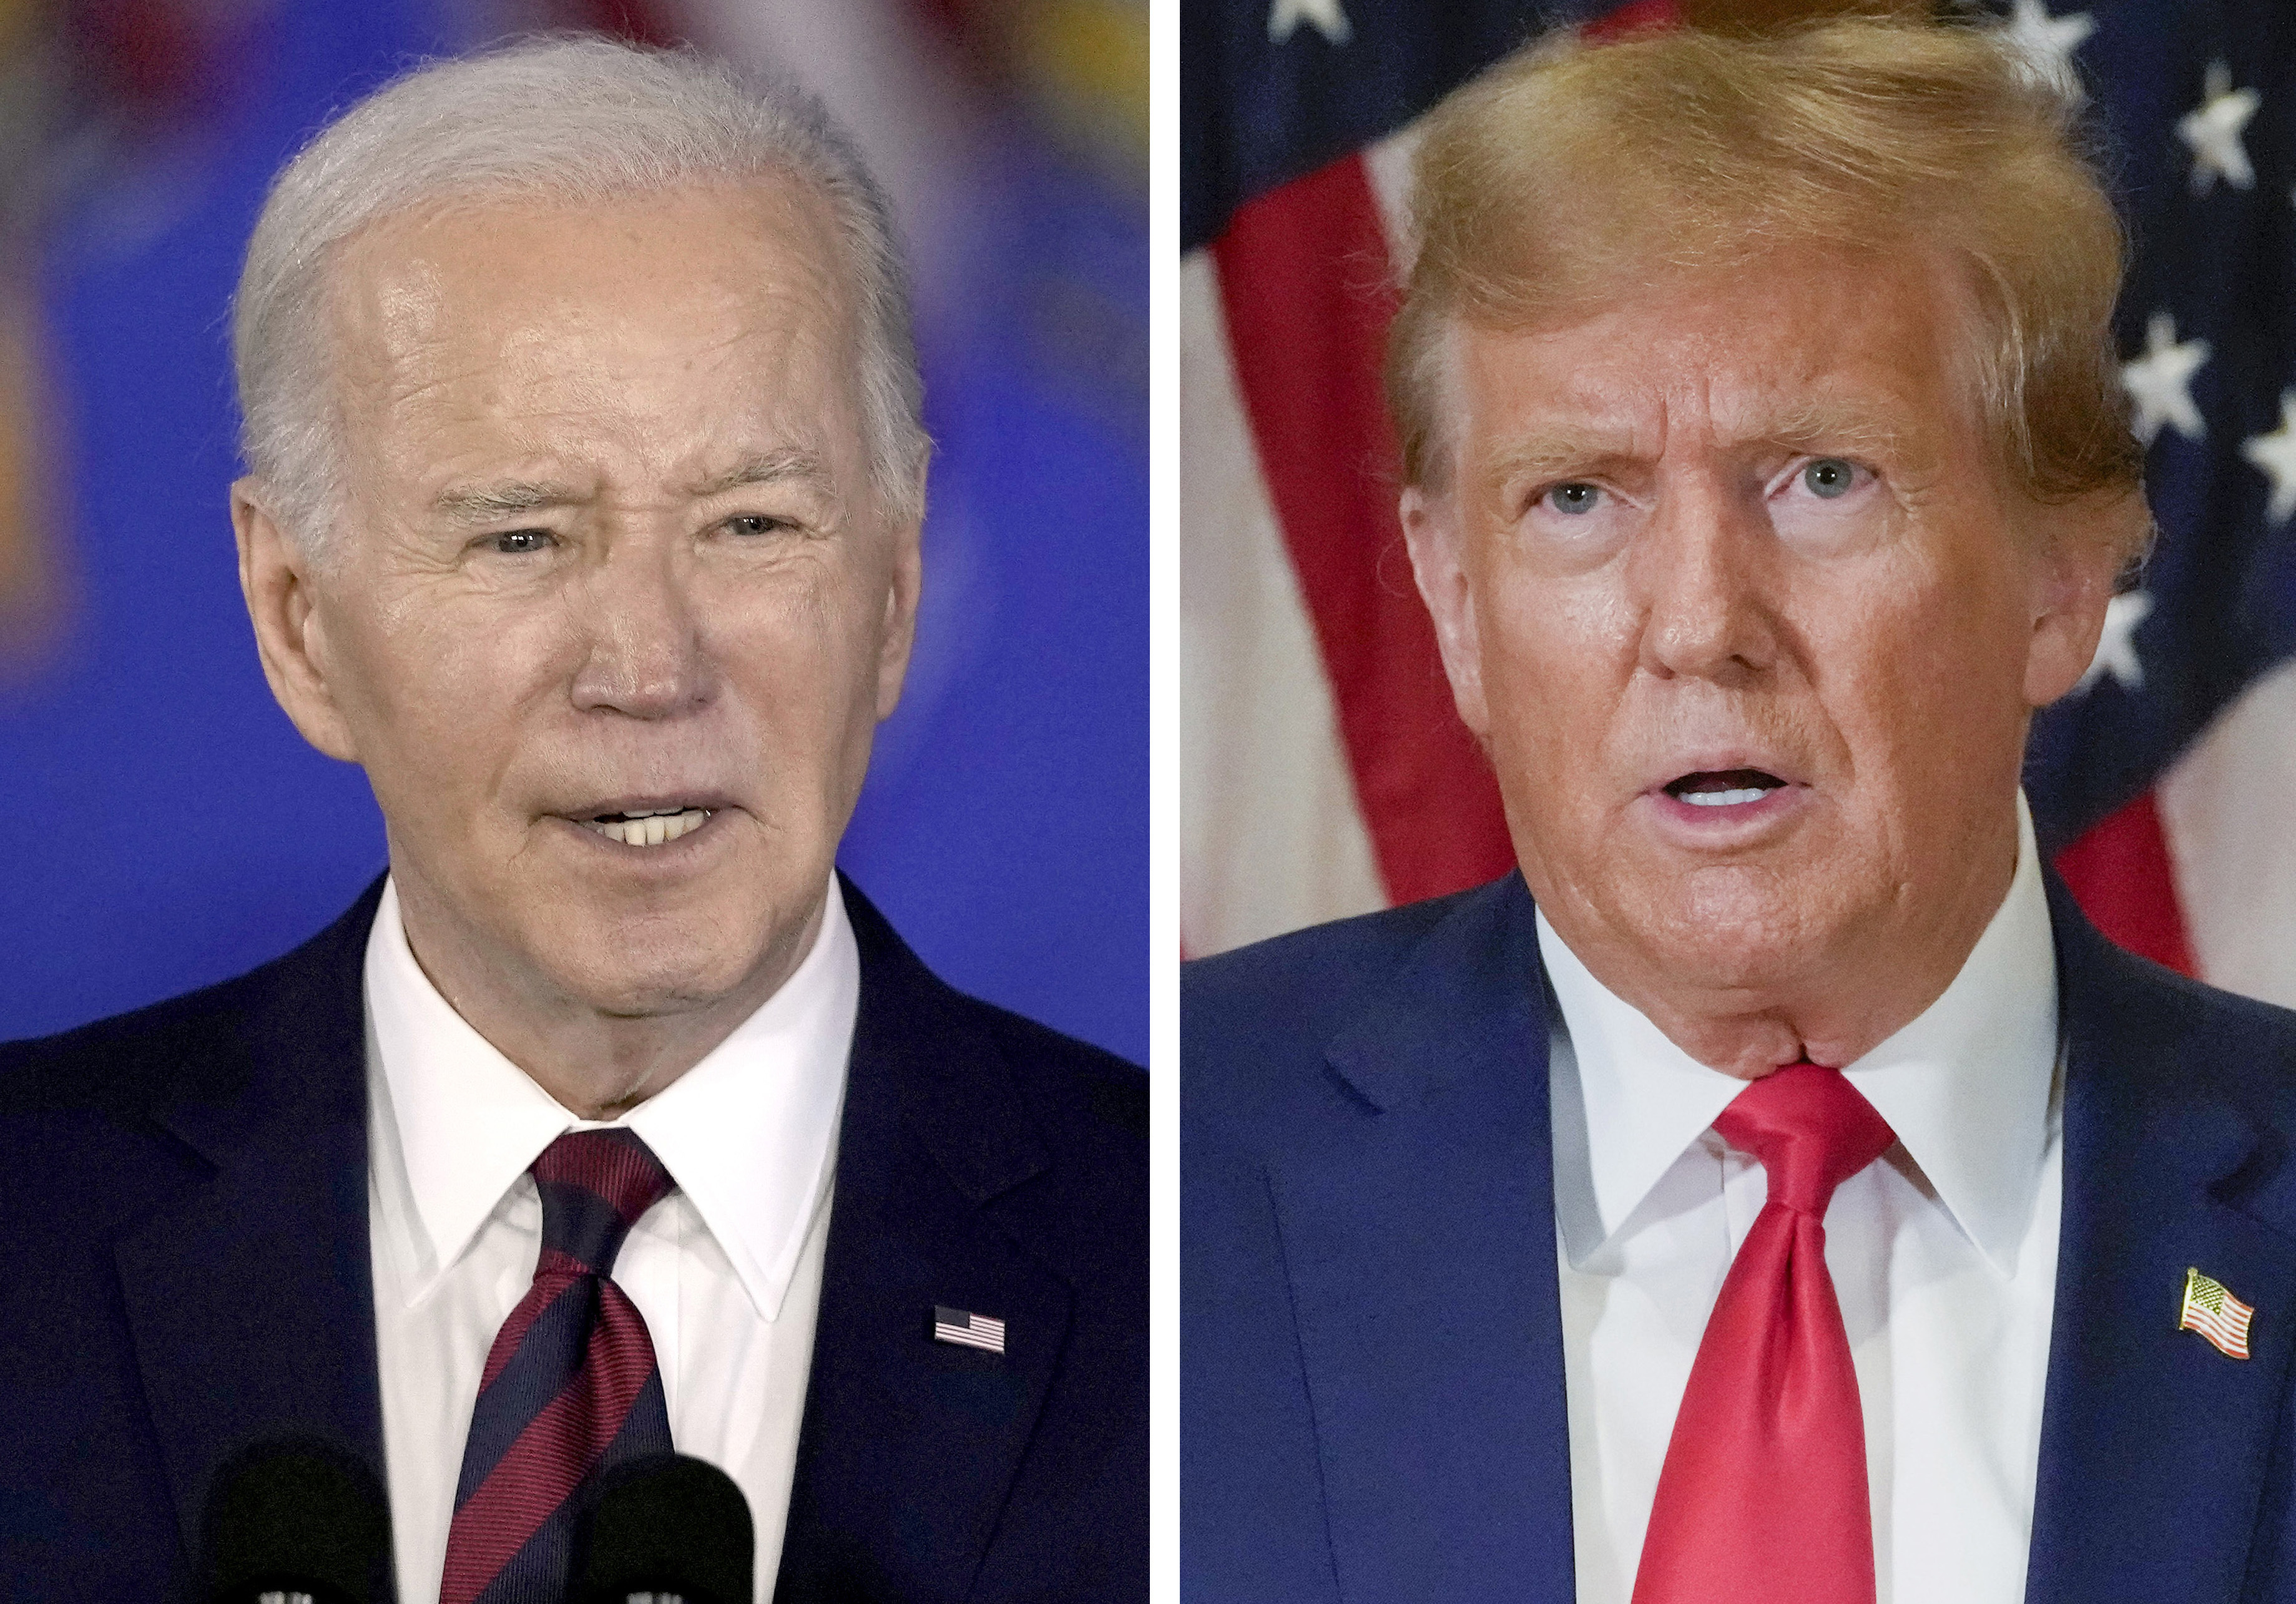 In this combination photo, President Joe Biden speaks in Milwaukee, March 13, 2024, left, and former President Donald Trump speaks in New York, Jan. 11, 2024. A new poll conducted April 4-8 from the AP-NORC Center for Public Affairs Research finds that more than half of U.S. adults think Biden's presidency has hurt the country on cost of living and immigration. Meanwhile, nearly half think Trump's presidency hurt the country on voting rights and election security, relations with foreign countries, abortion laws and climate change. (AP Photo)